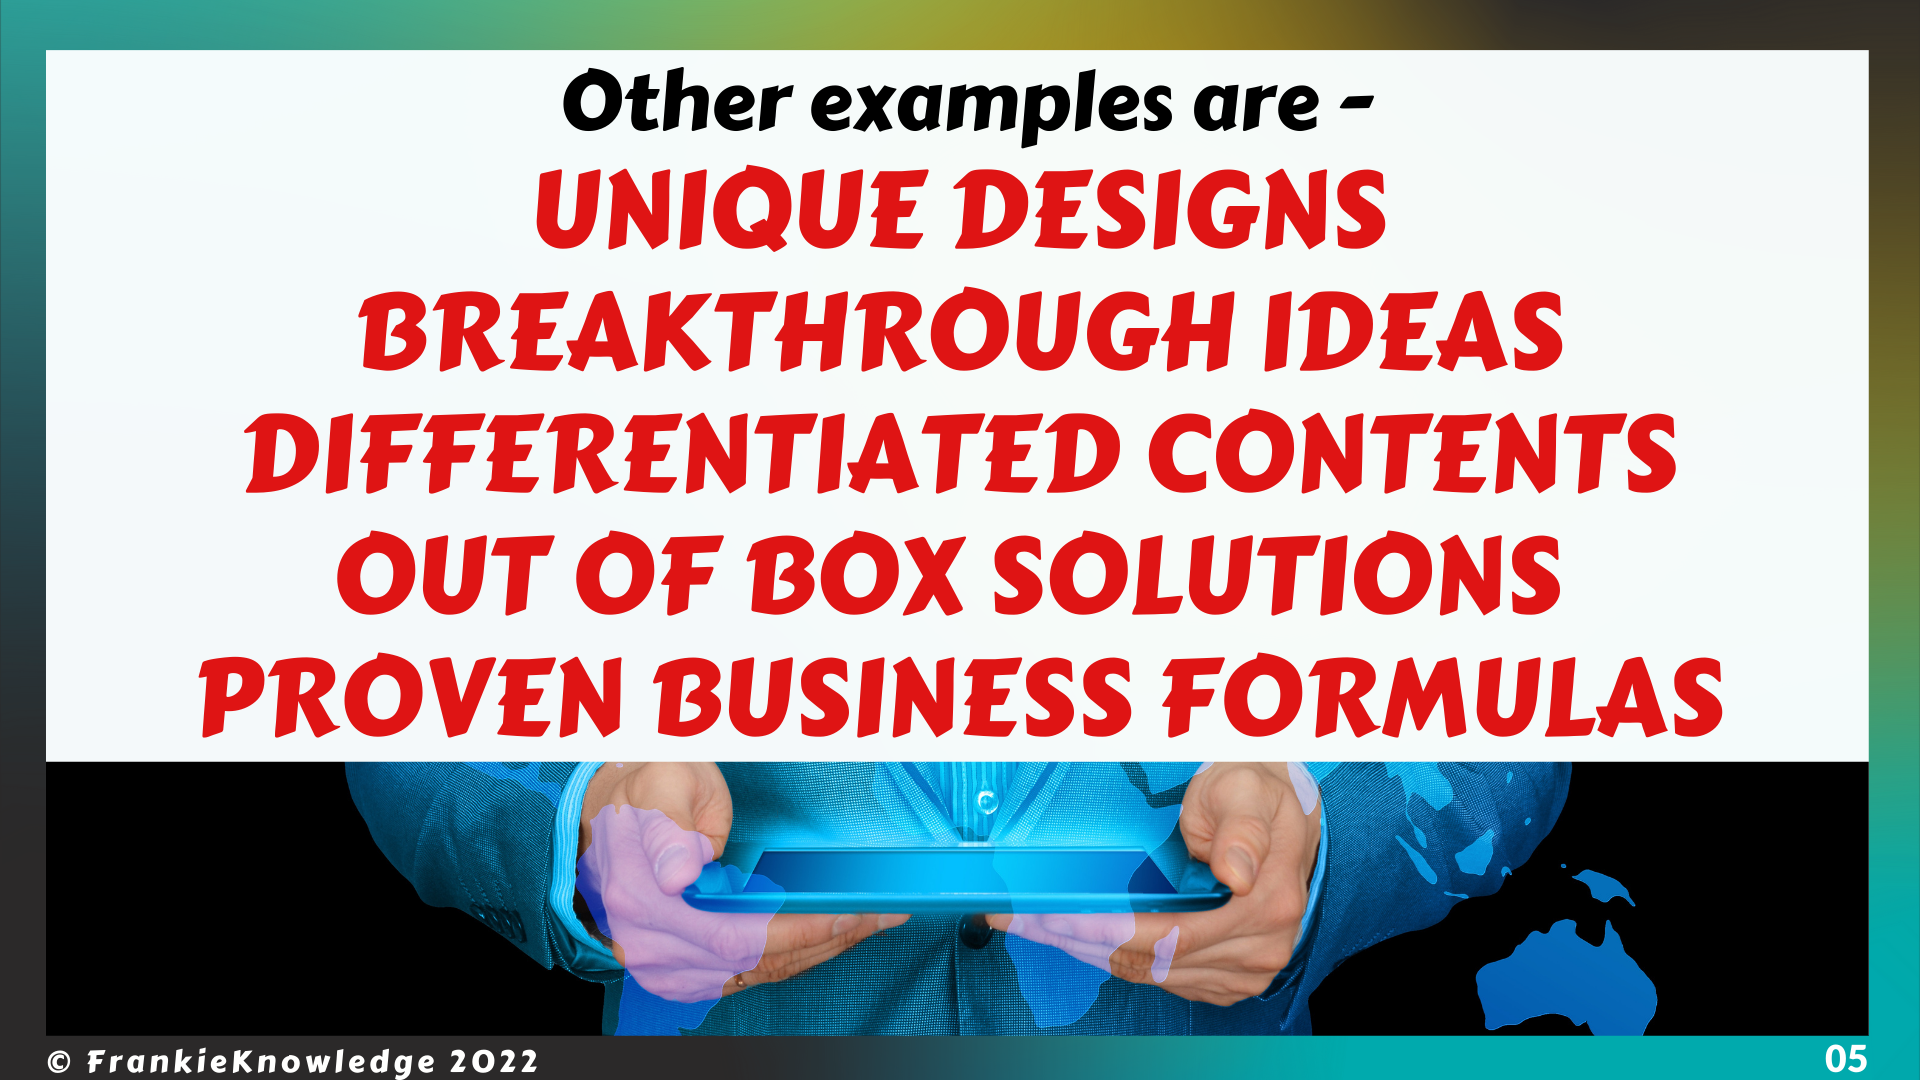  Other examples are - UNIQUE DESIGNS BREAKTHROUGH IDEAS DIFFERENTIATED CONTENTS OUT OF BOX SOLUTIONS  PROVEN BUSINESS FORMULAS